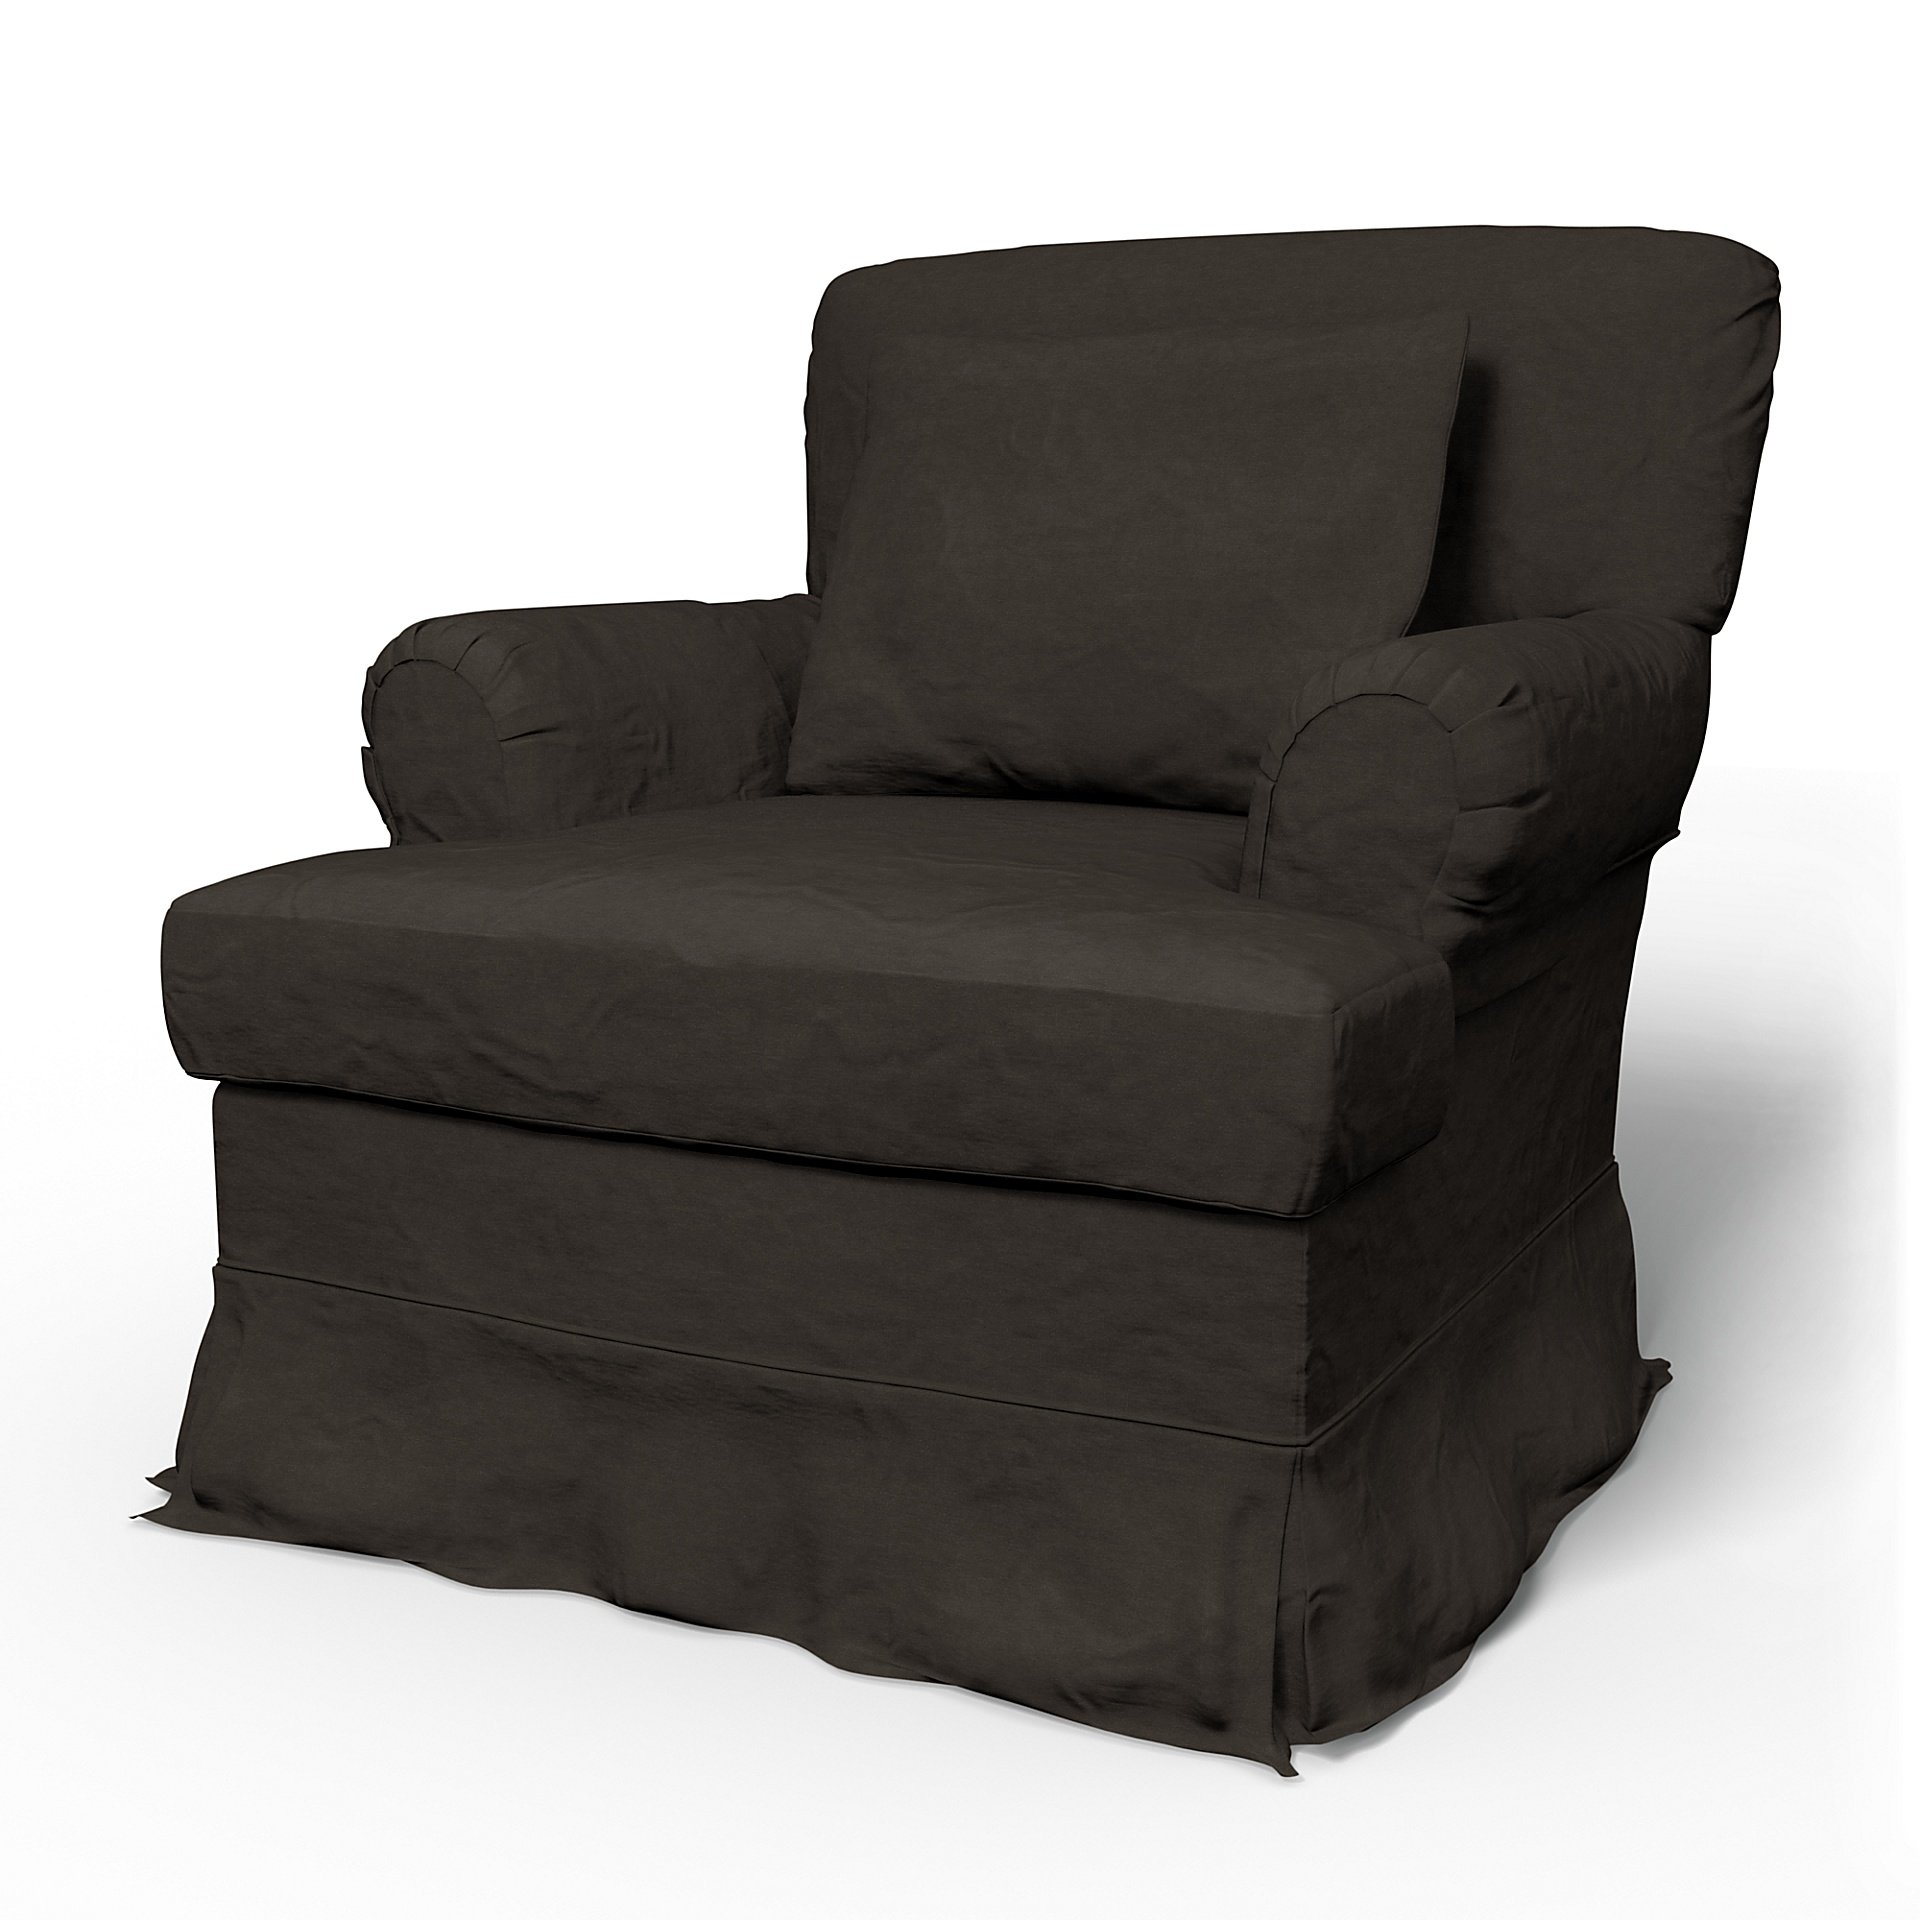 IKEA - Stockholm Armchair Cover (1994-2000) Small Loose Fit, Licorice, Velvet - Bemz